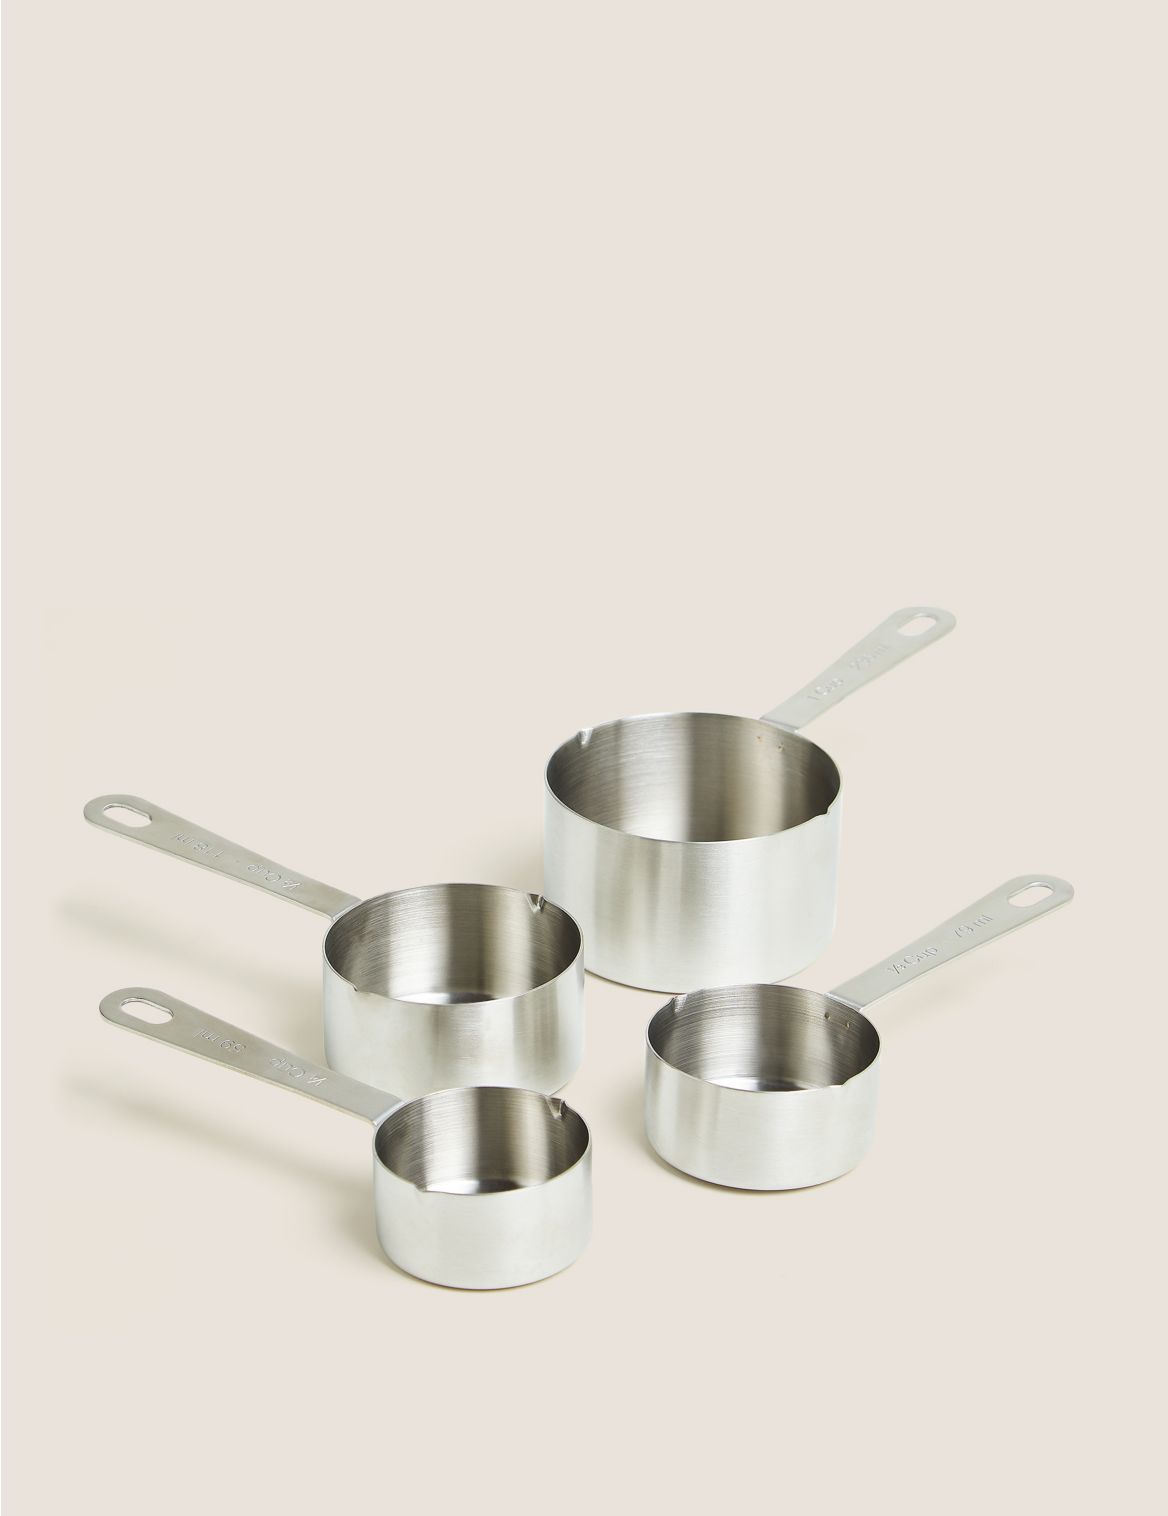 Image of Set of 4 Stainless Steel Measuring Cups silver